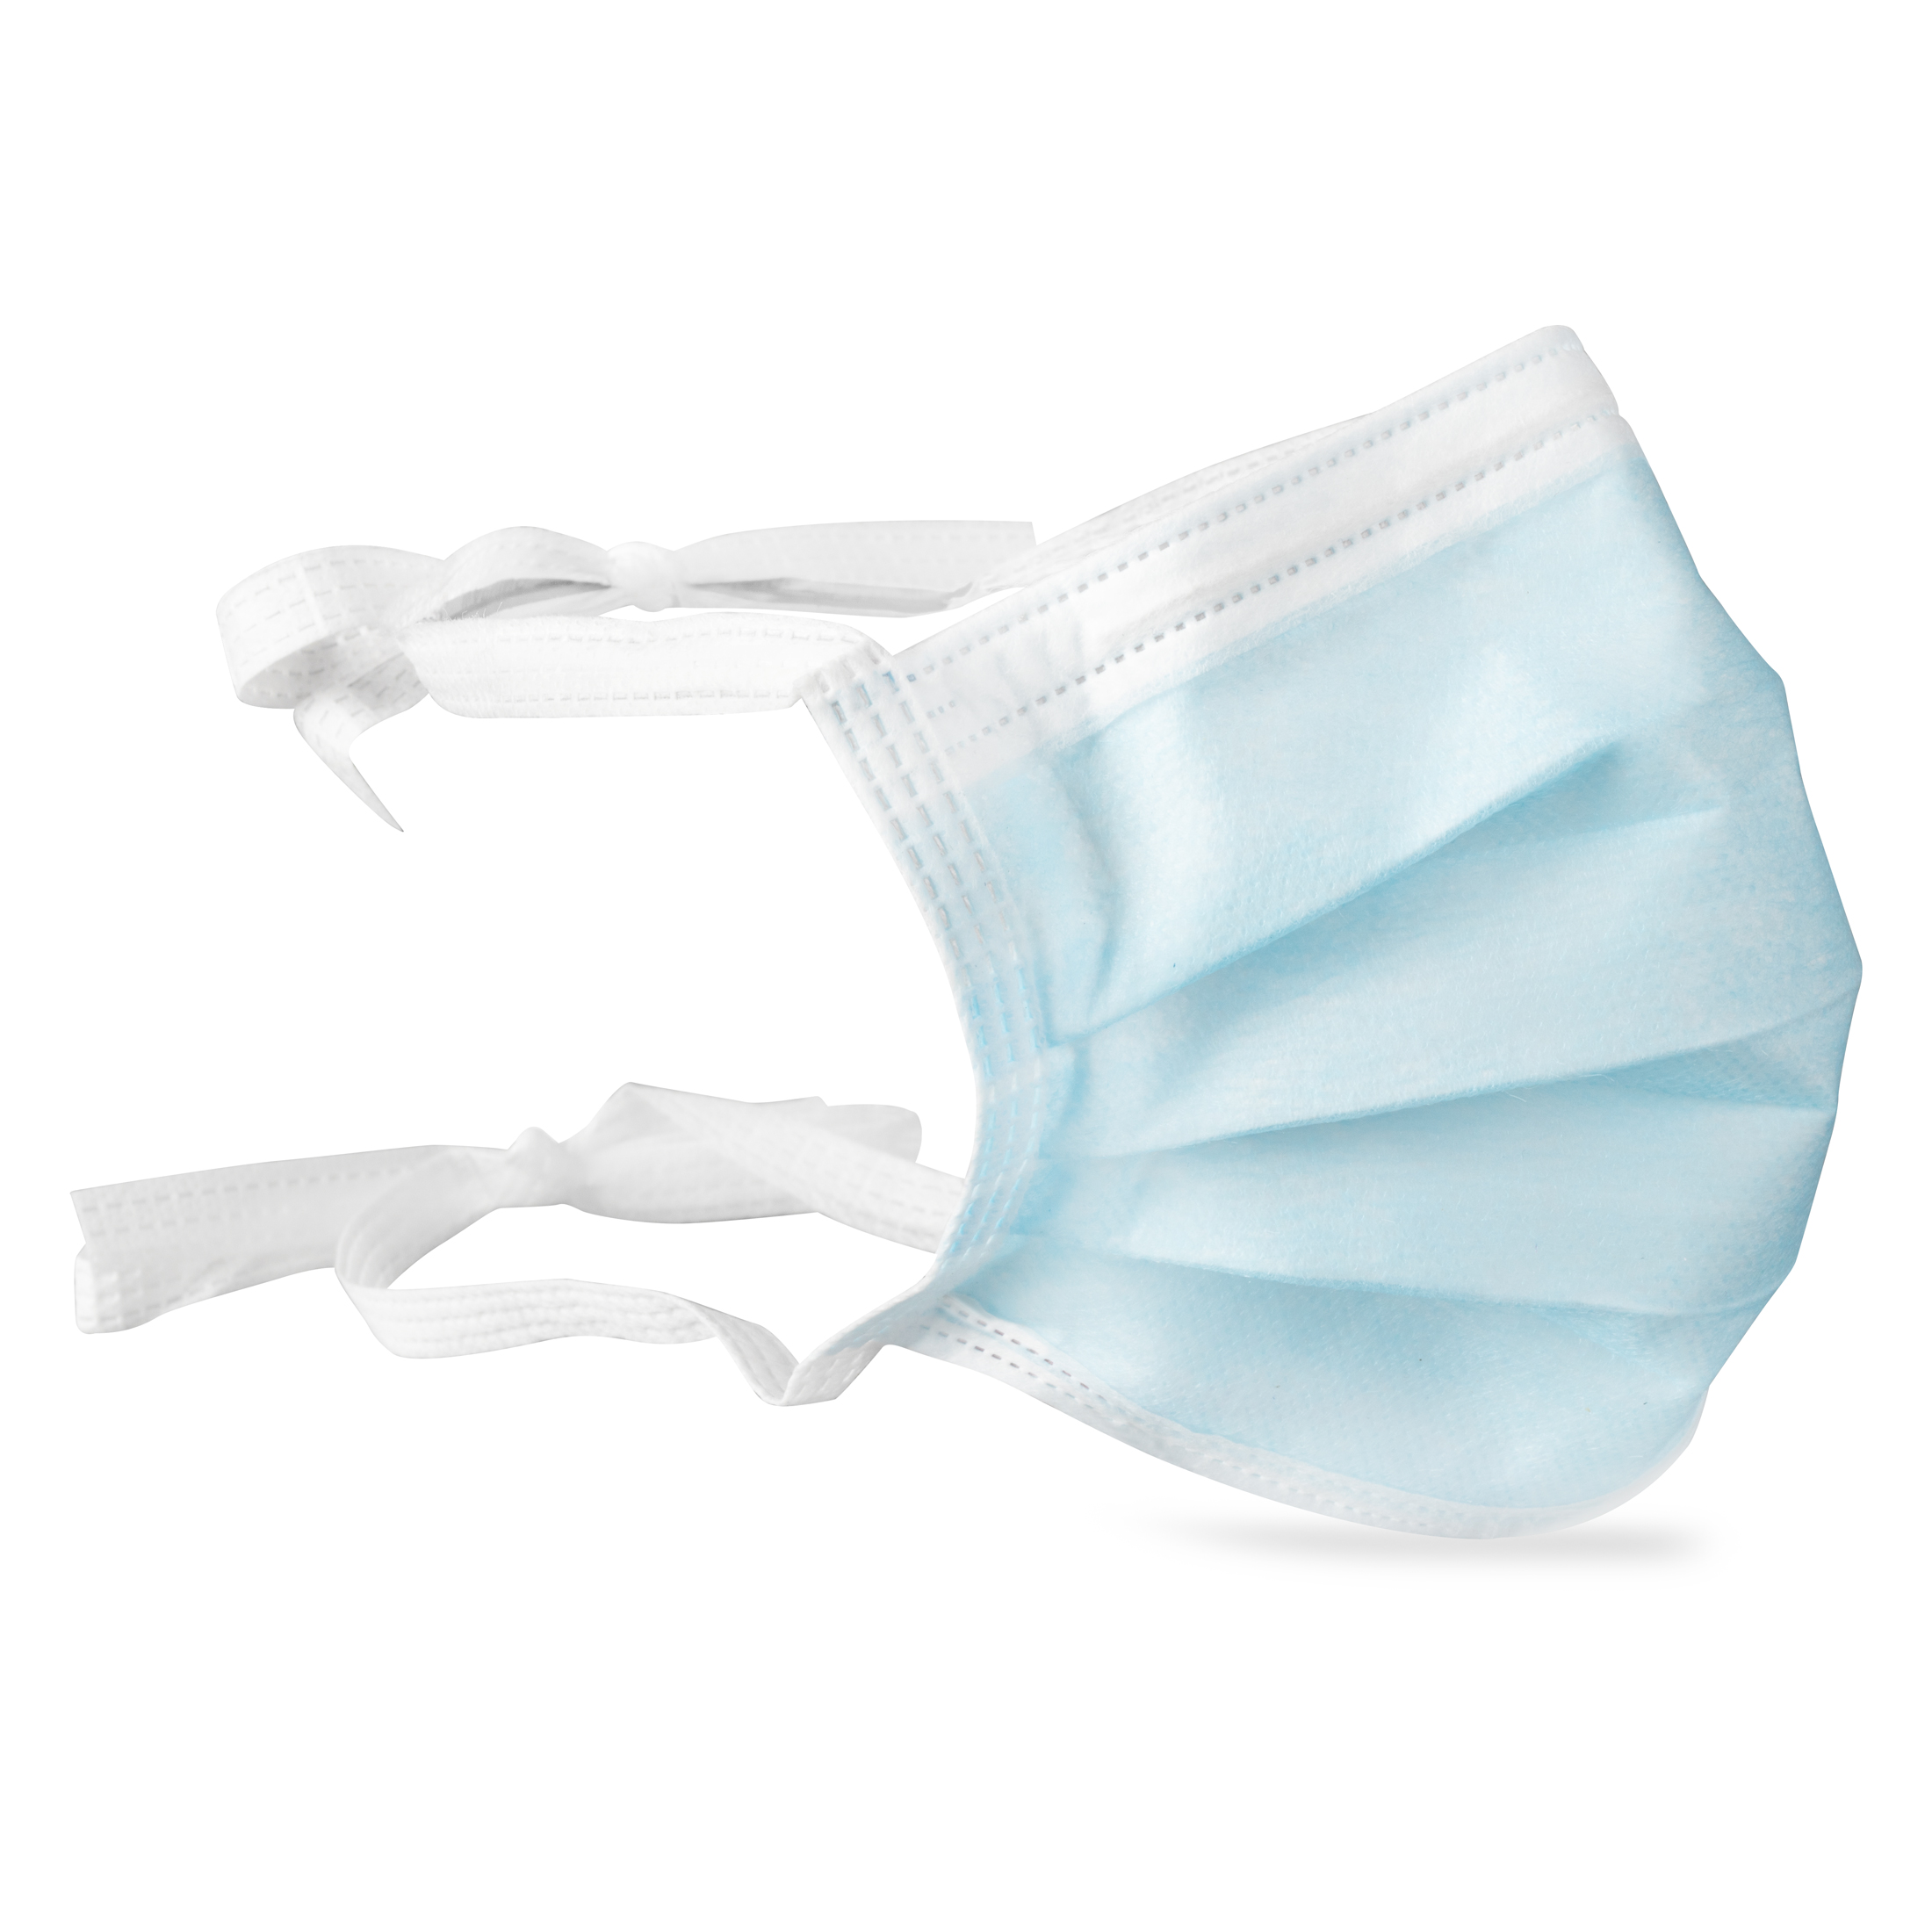 Dukal Surgical Face Mask, Ties, Level 1 $50.00/Case of 300 Dukal 1540